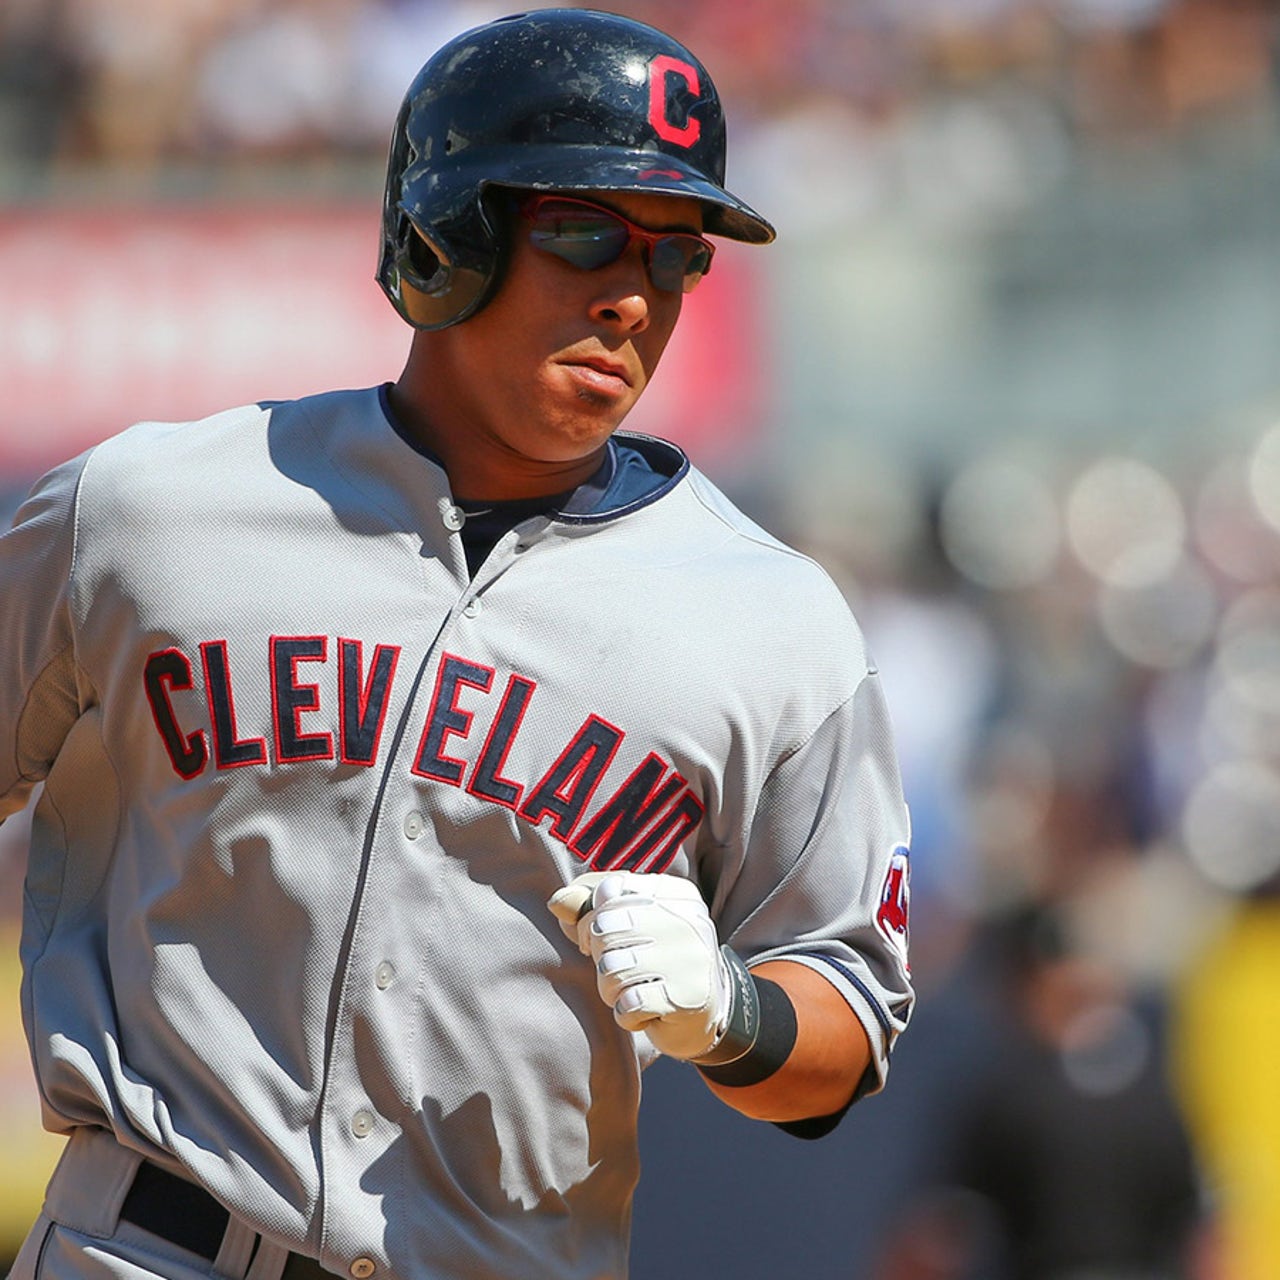 The Truth About Michael Brantley's Wife, Melissa Brantley